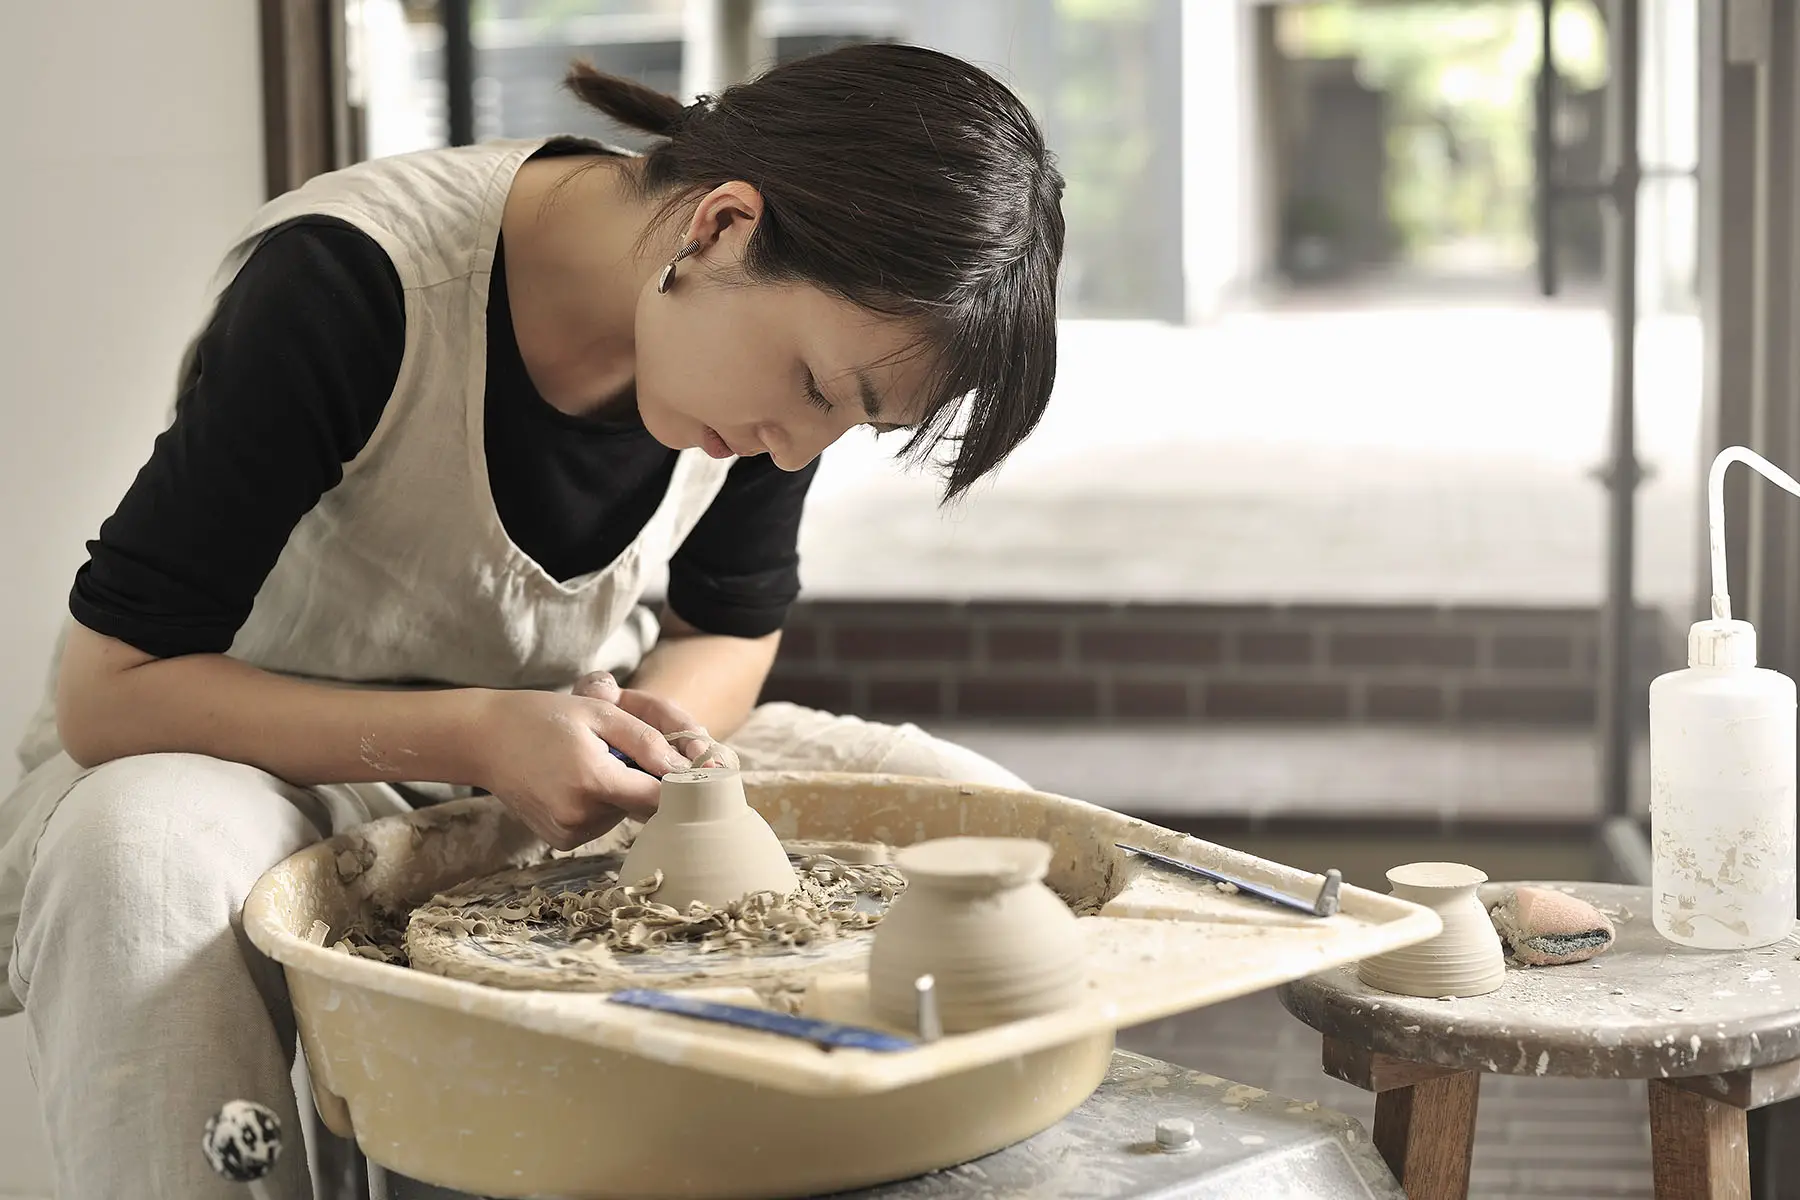 A Japanese woman is bent over a pottery wheel working on a new project